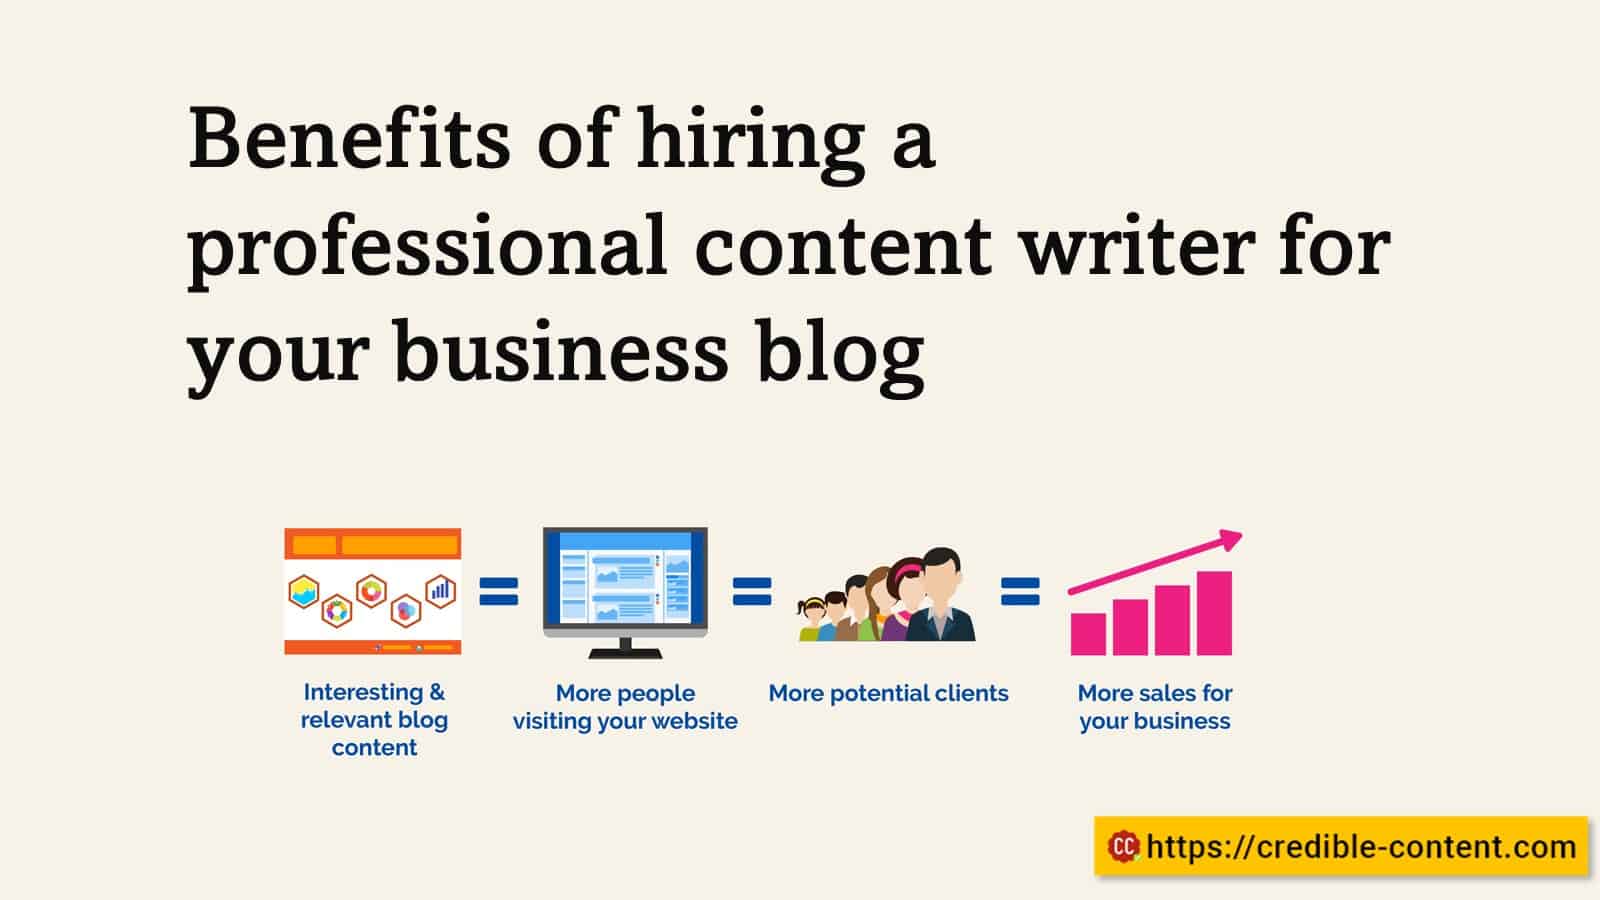 Benefits of hiring a professional content writer for your business blog